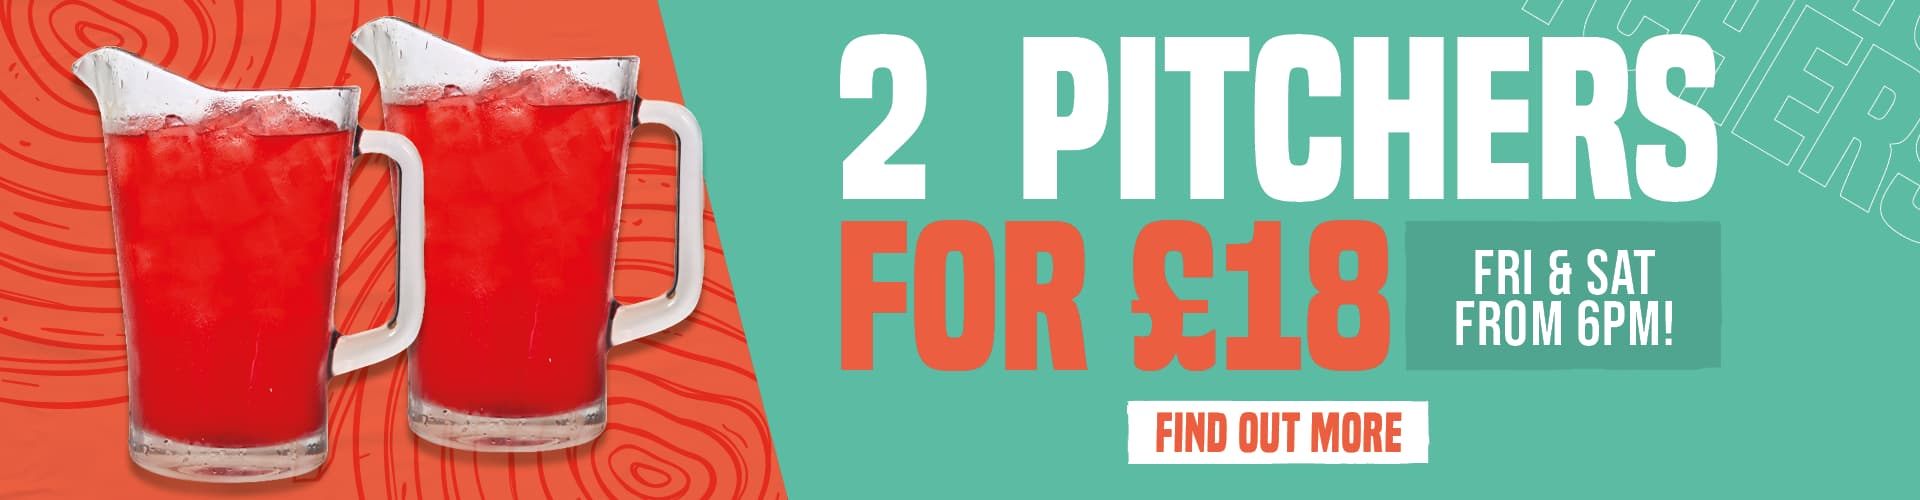 2 Pitchers for £18 - Fri and Sat from 6pm! Find Out More